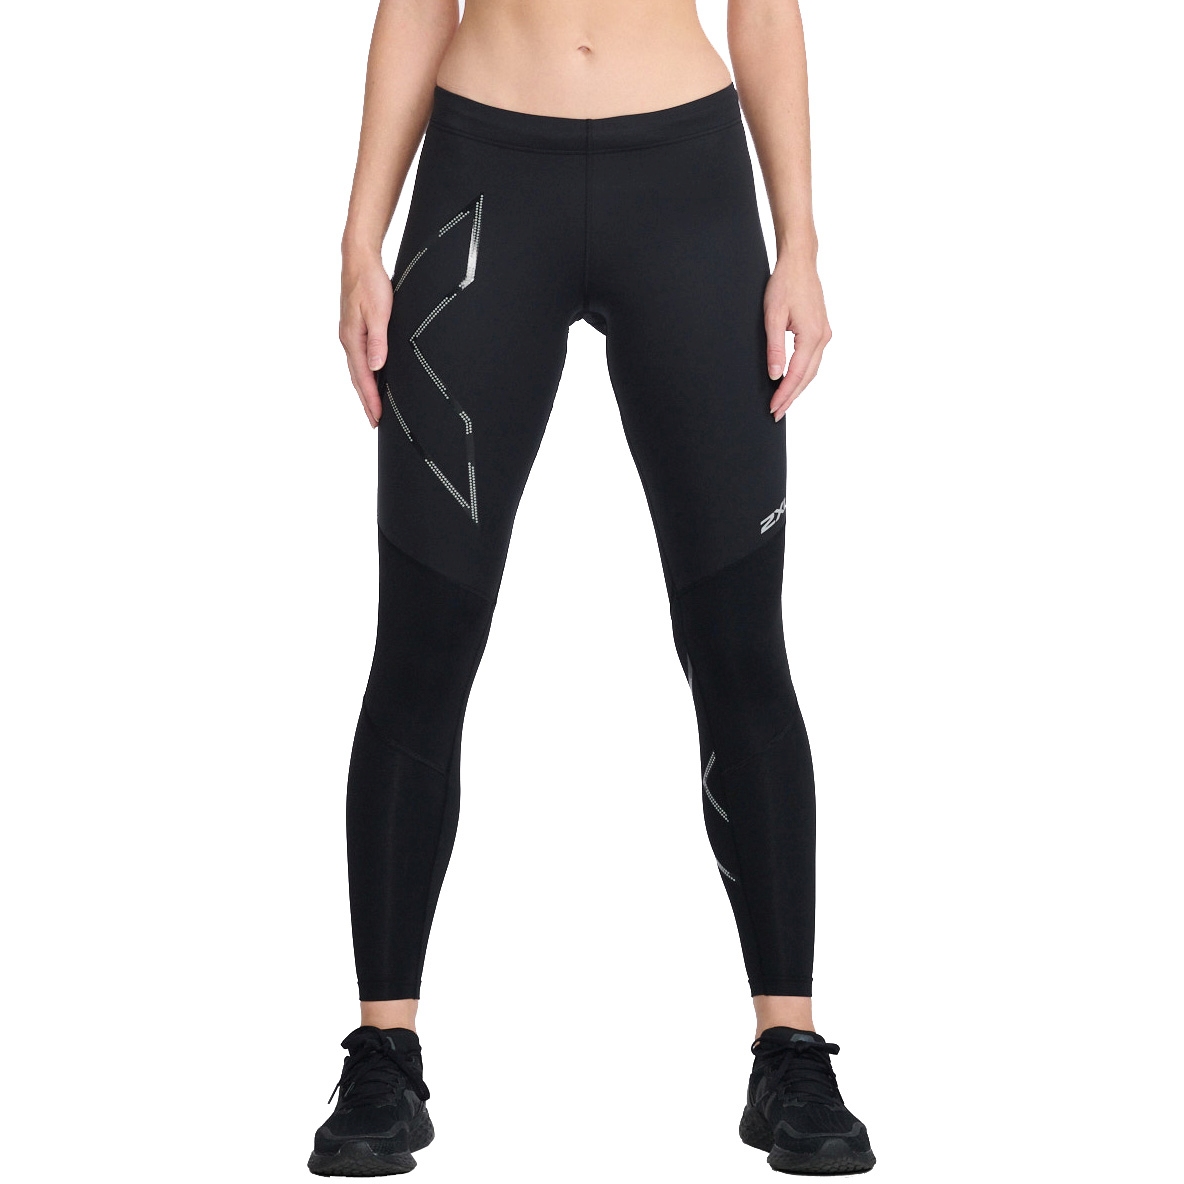 Image of 2XU Ignition Shield Compression Women's Tights - black/black reflective